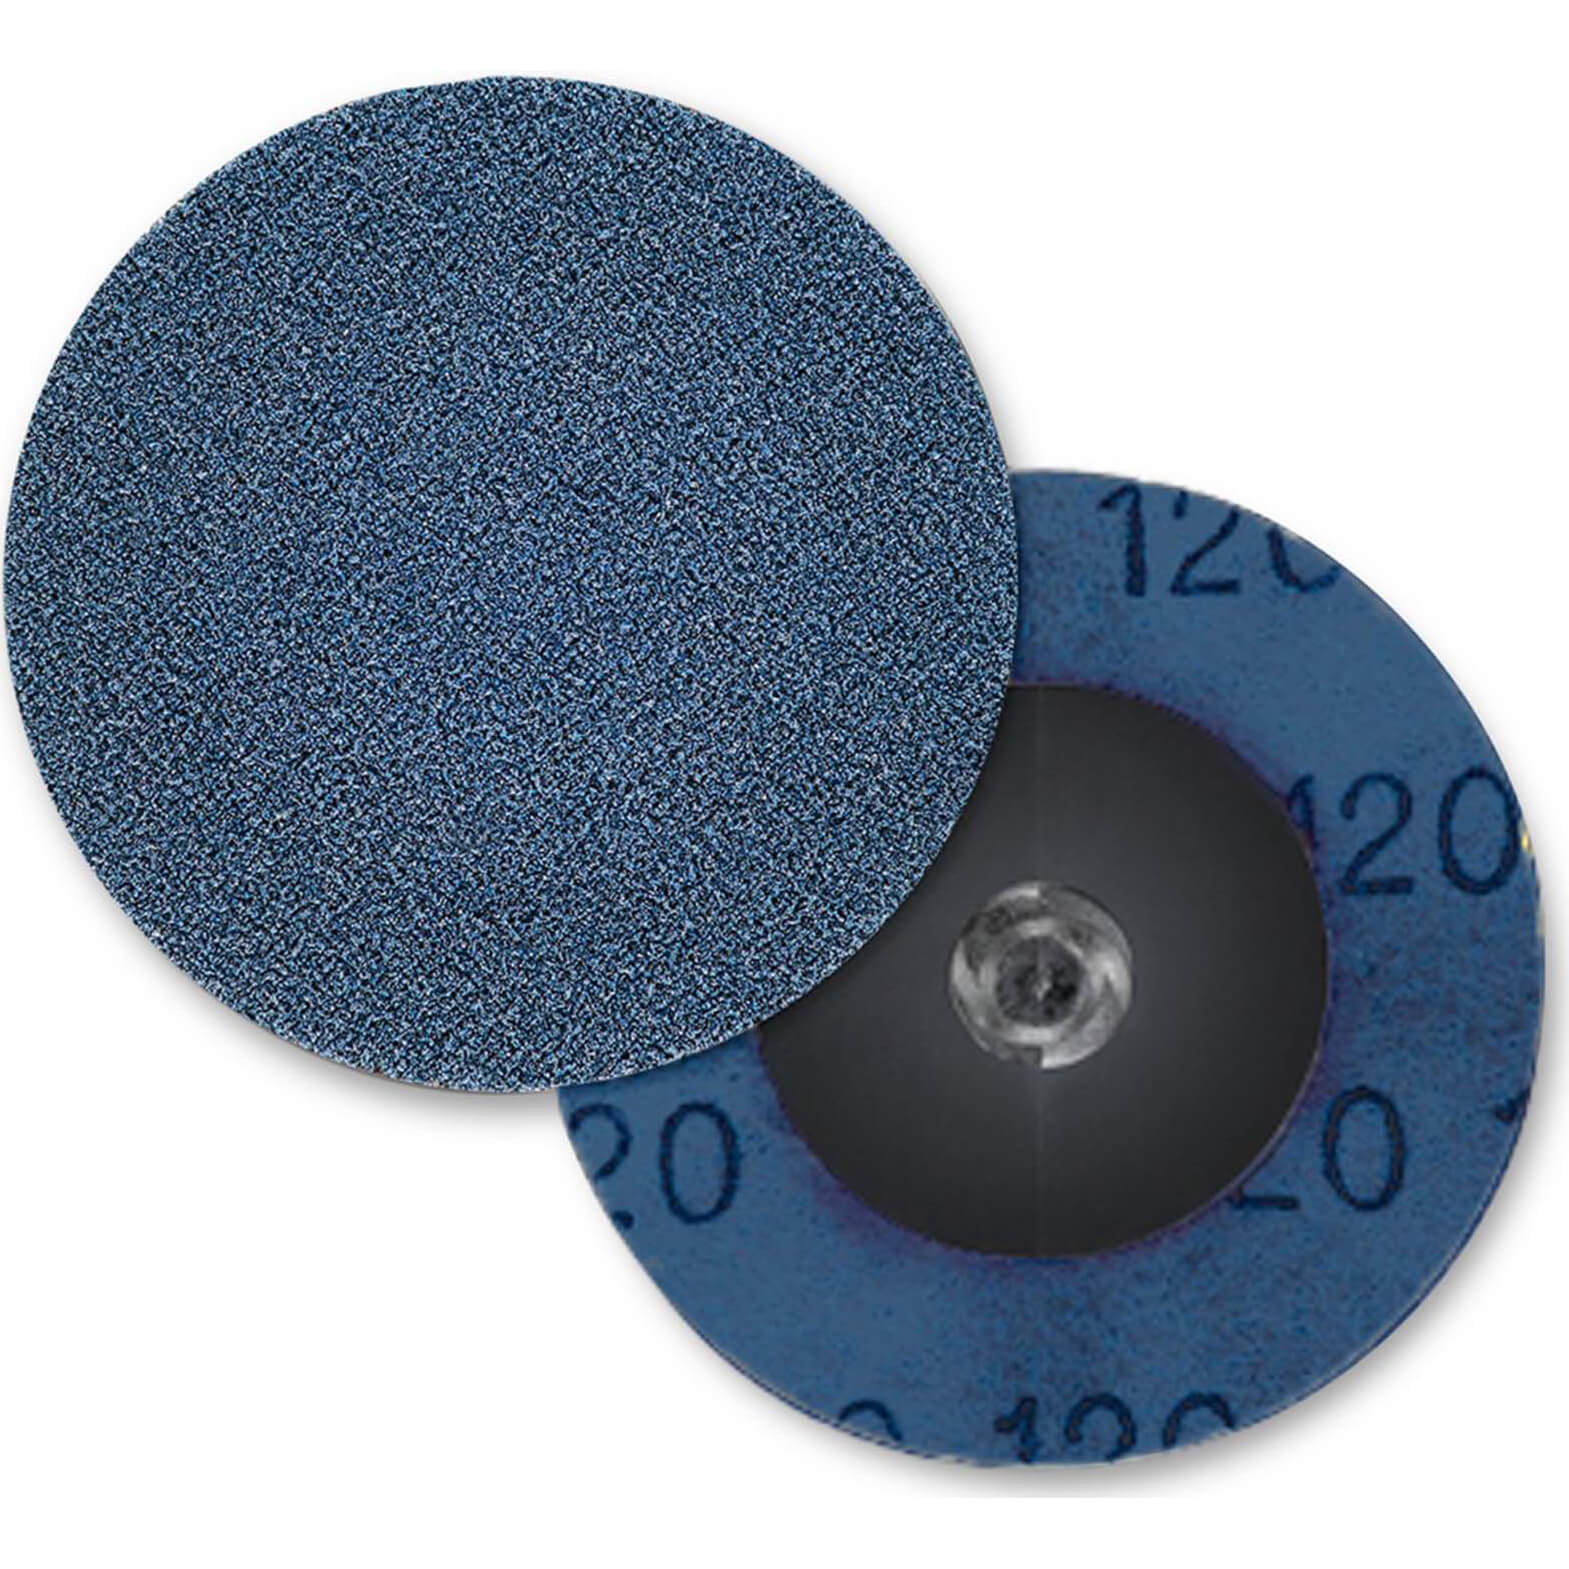 Image of Sia 2820 Siamet X Quick Change Abrasives Discs 50mm 240g Pack of 1